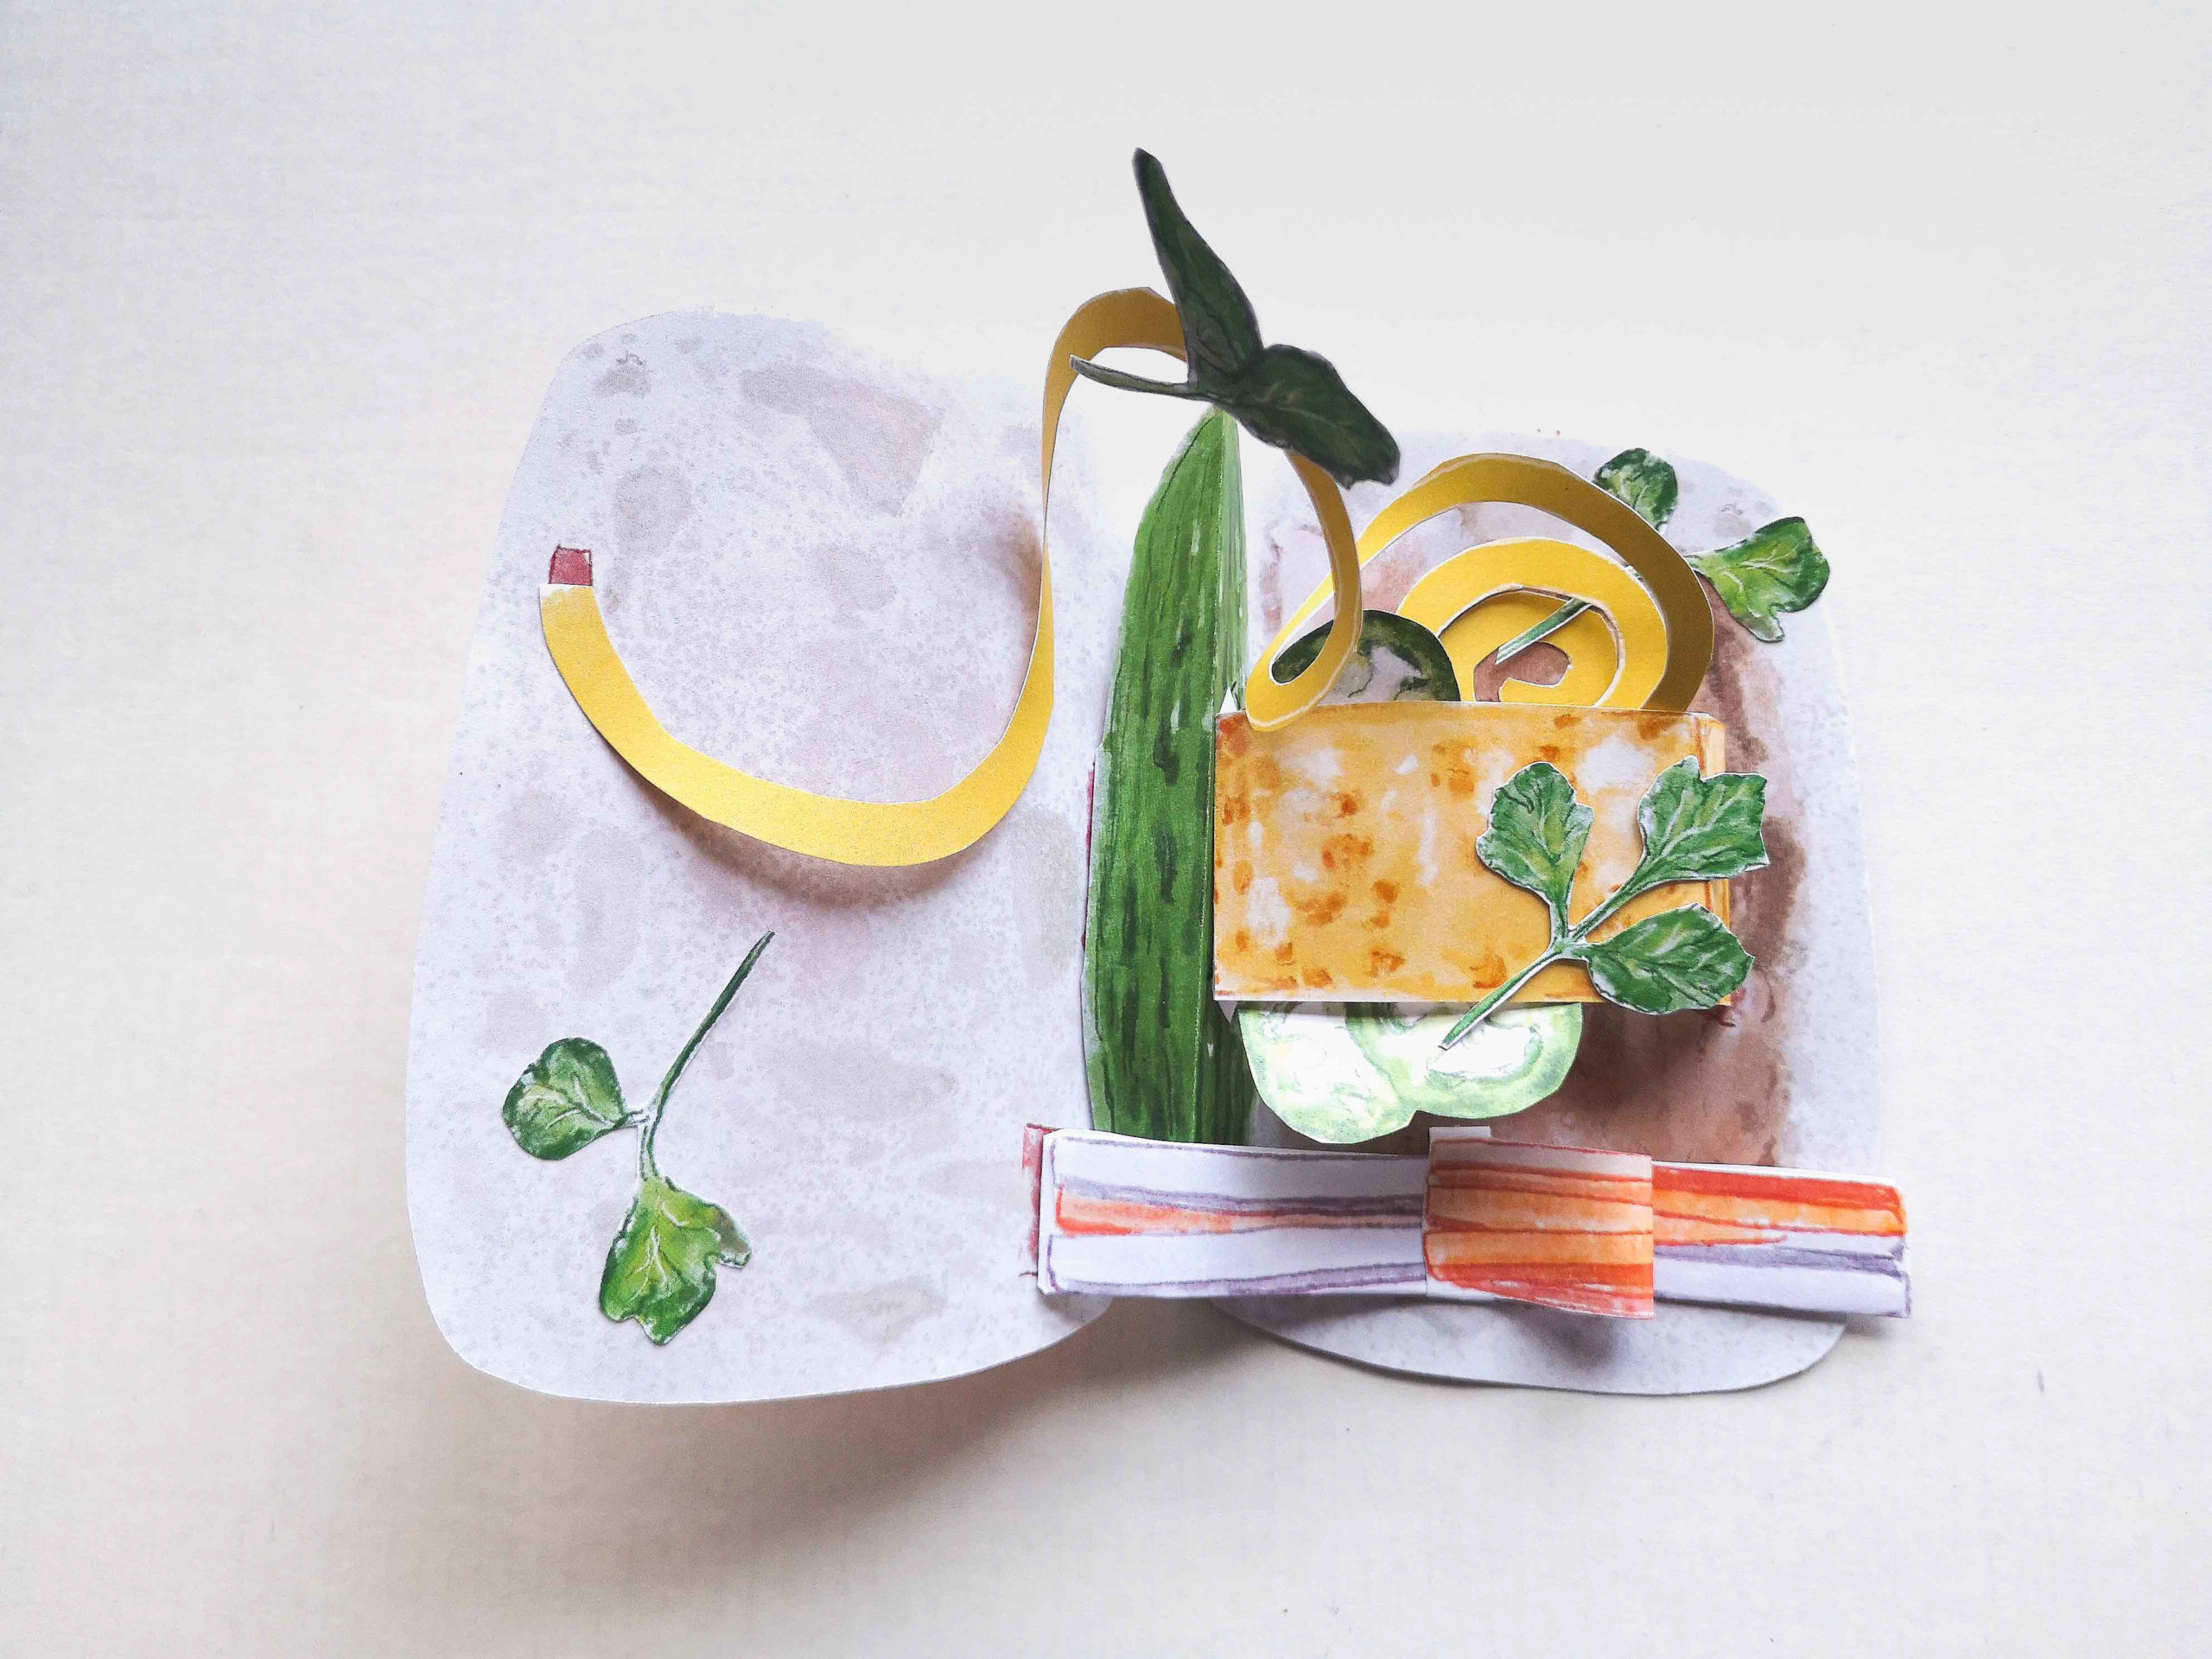 Pictured is a pop-up Bánh Mì made from colored cardstock.